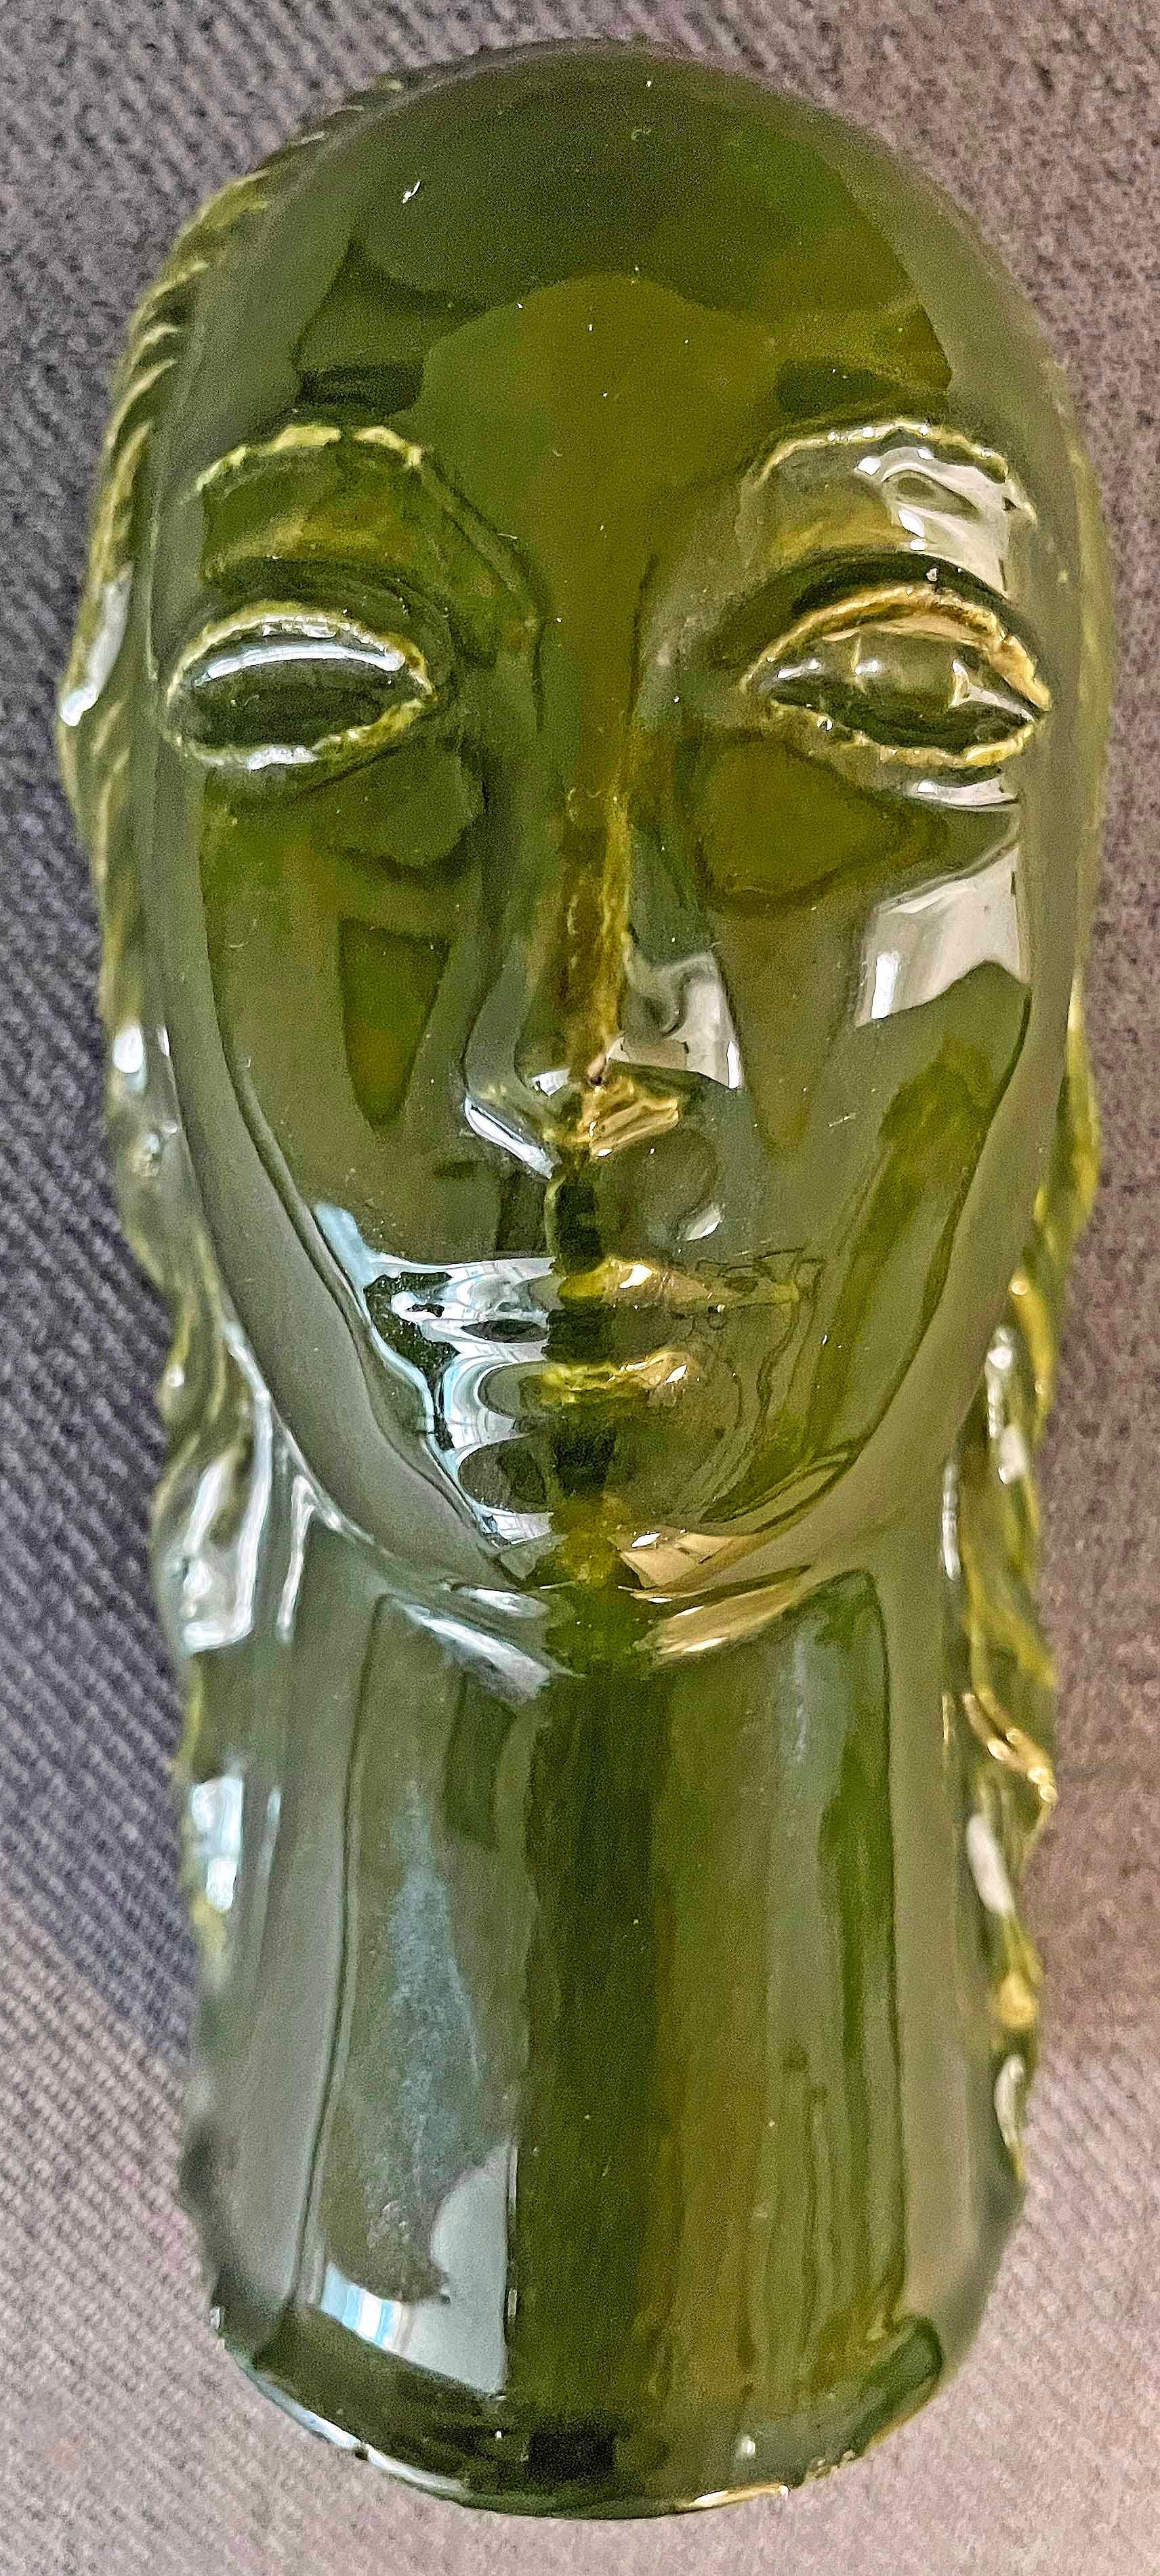 A striking example of Art Deco ceramic sculpture, this female head was made by David Seyler for the Harold Bopp Pottery in northern Kentucky, in the brief period before it became the Kenton Hills pottery in 1940. Bopp had been the superintendent of